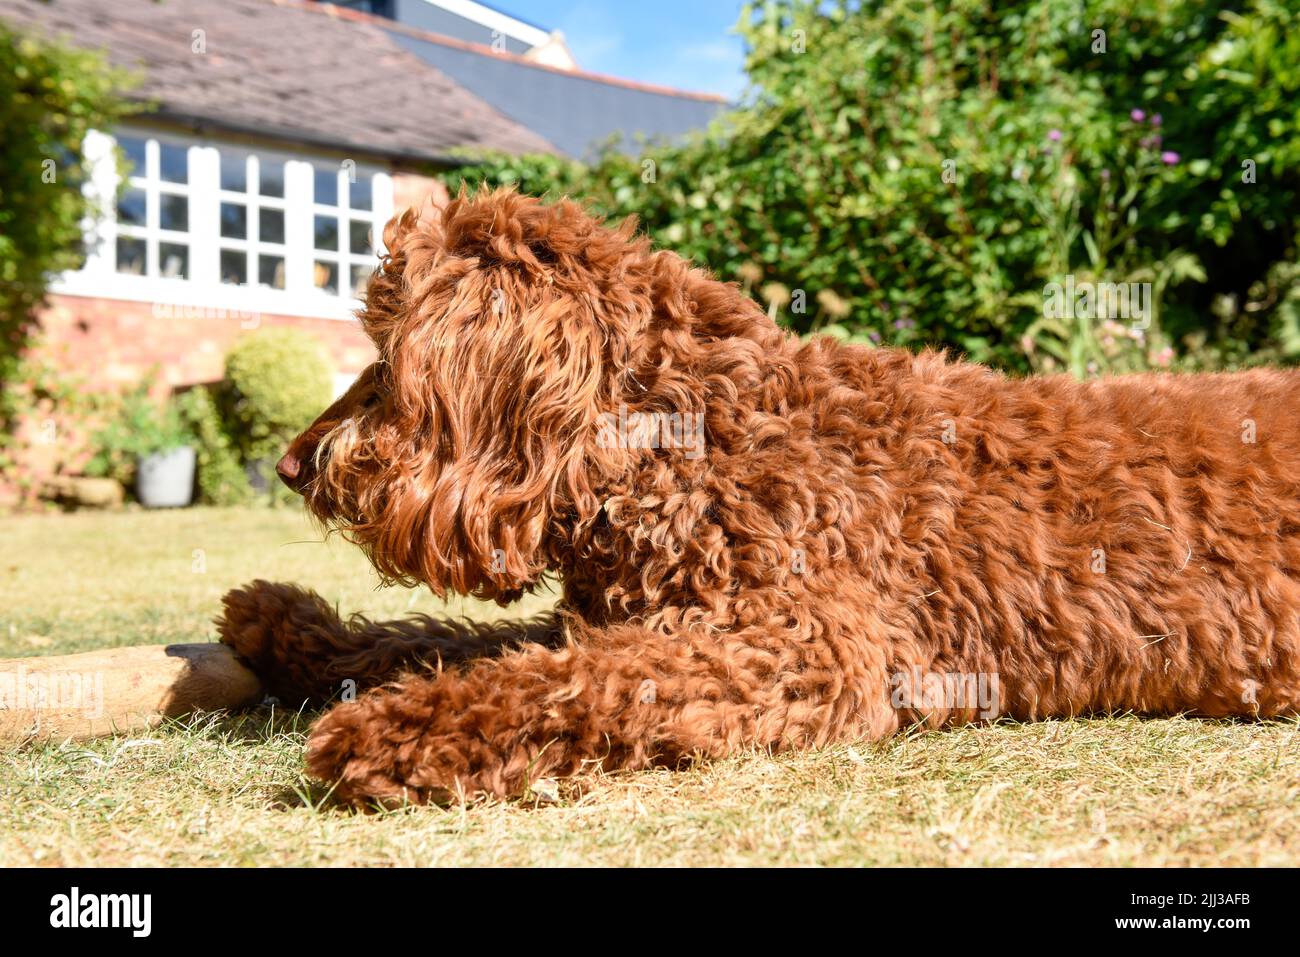 Side profile view of a shaggy brown dog with a stick outside in a garden Stock Photo